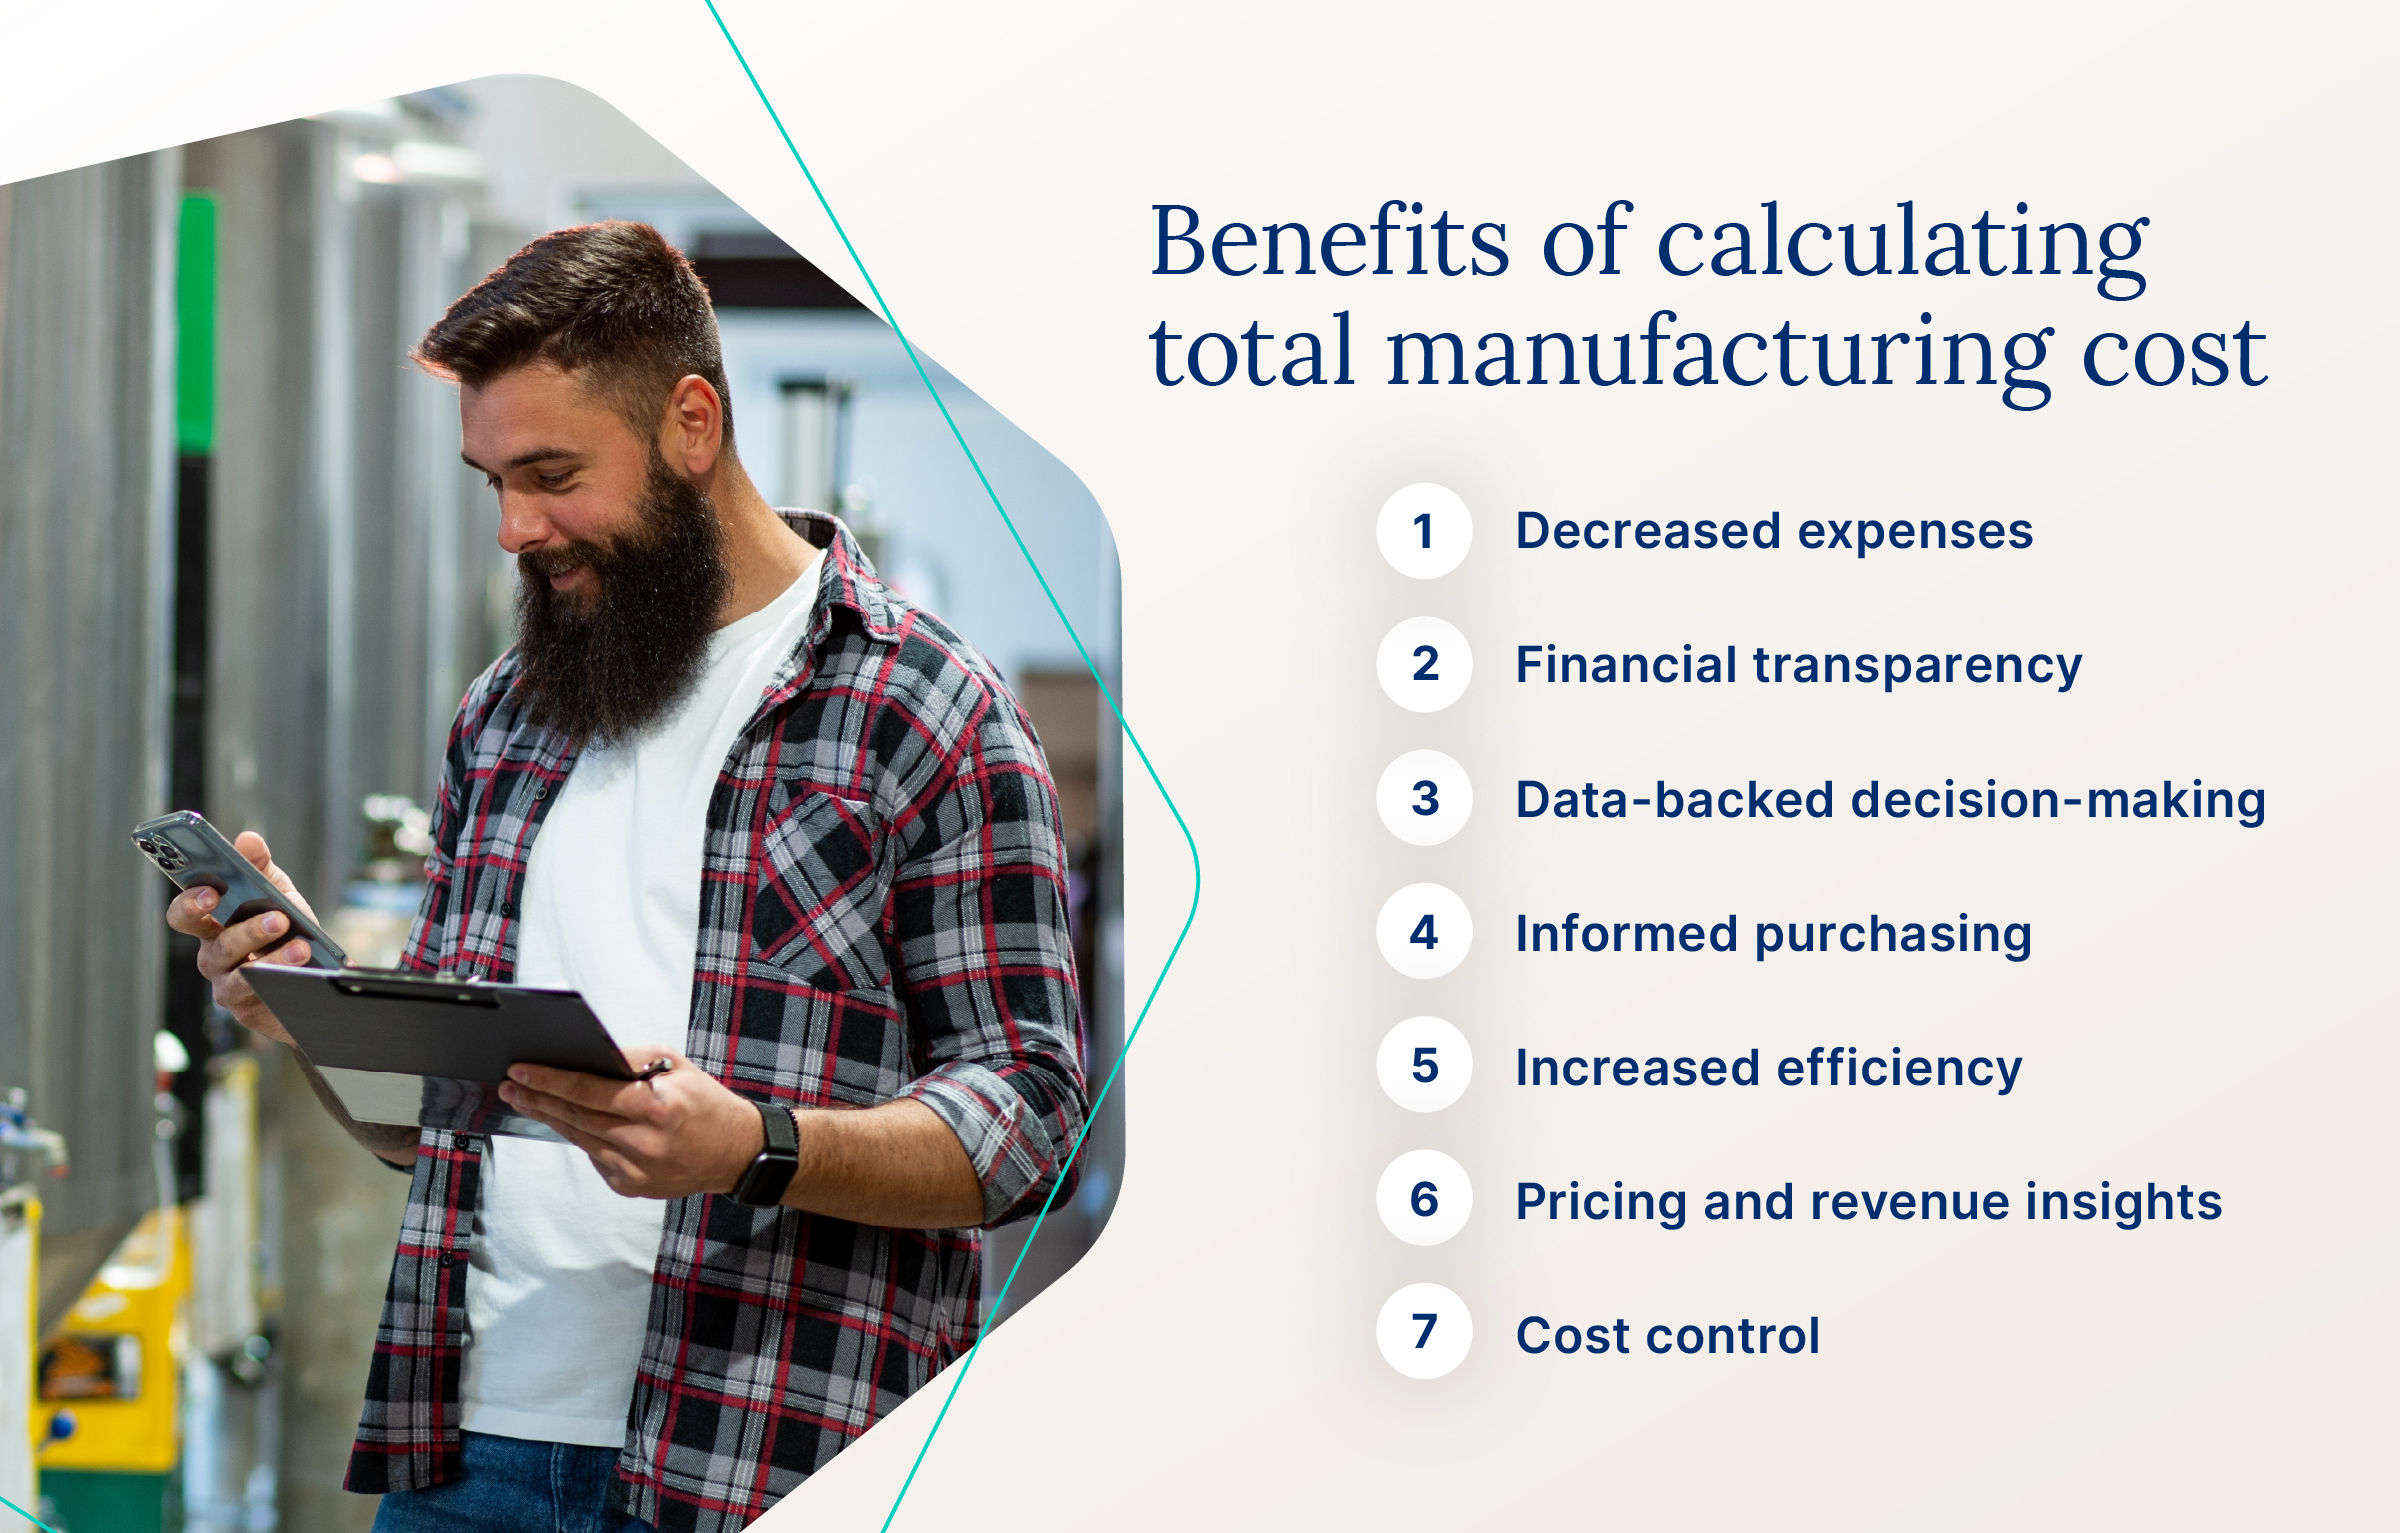 Benefits of calculating total manufacturing cost